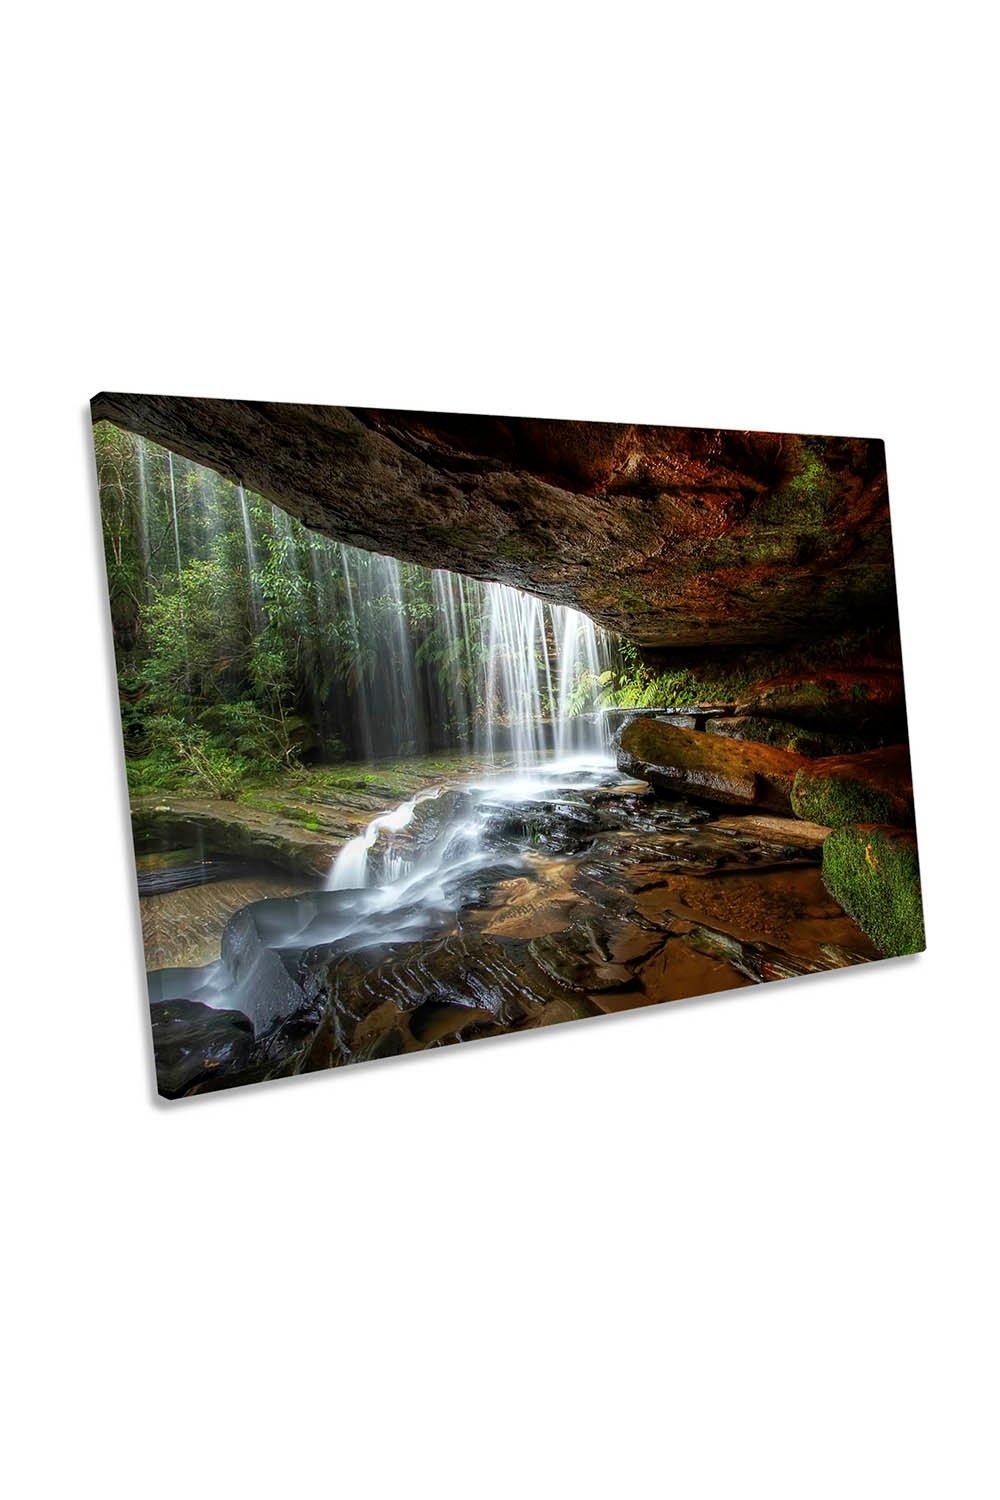 Under the Ledge Waterfall Nature Canvas Wall Art Picture Print